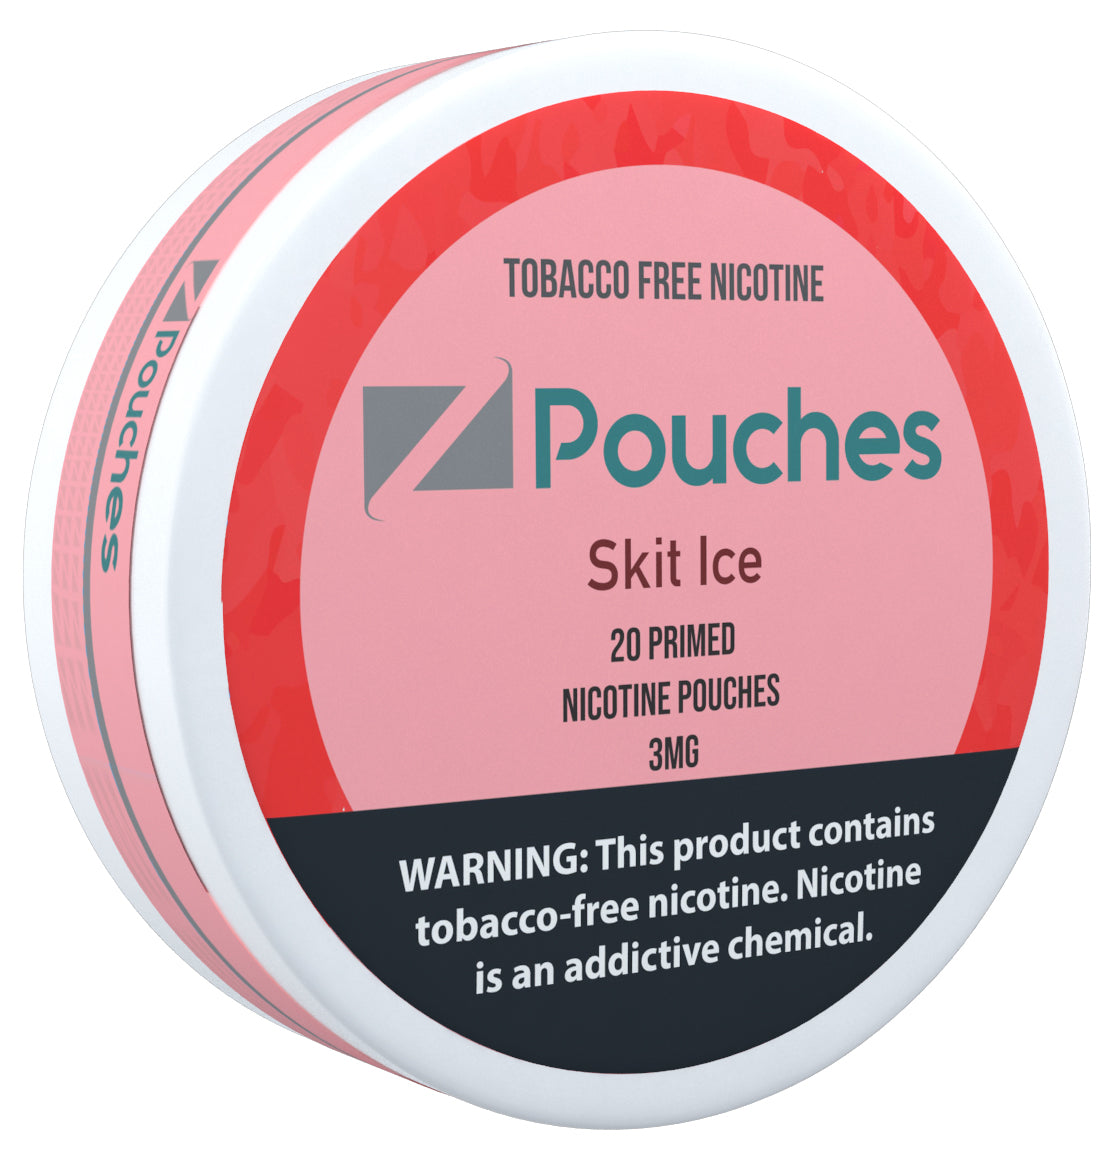 Z Pouches - Skit Ice - 7mg